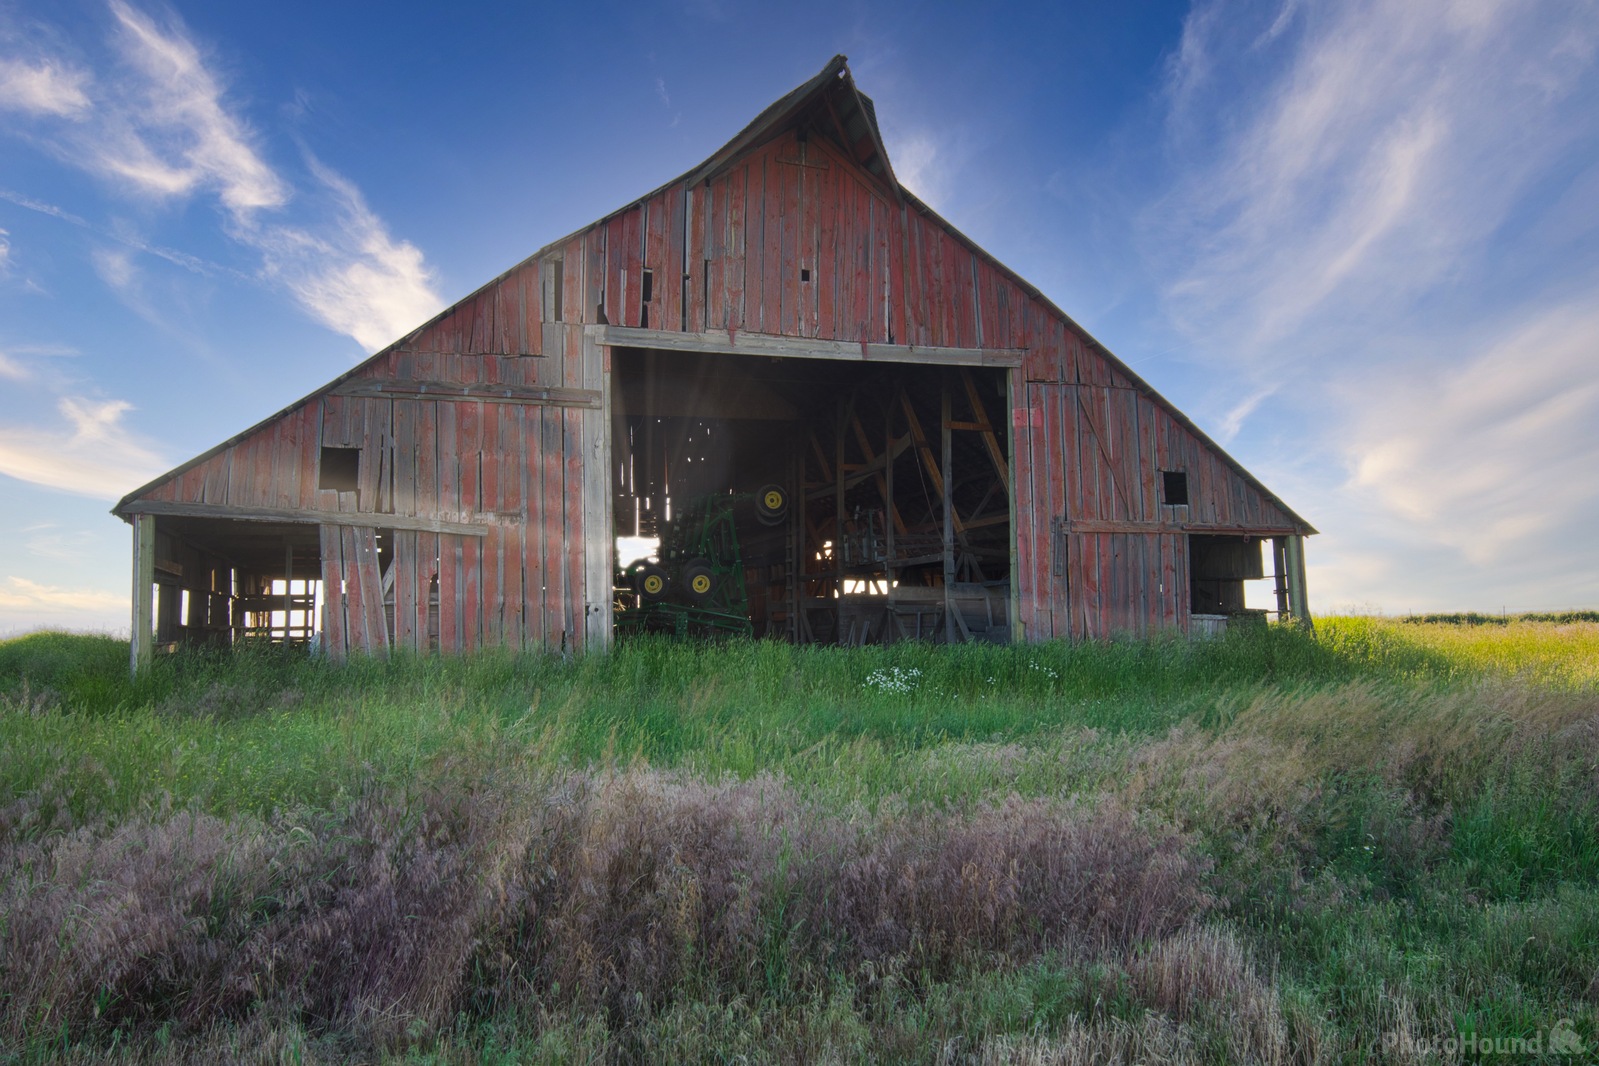 Image of The See Through Barn by Steve West